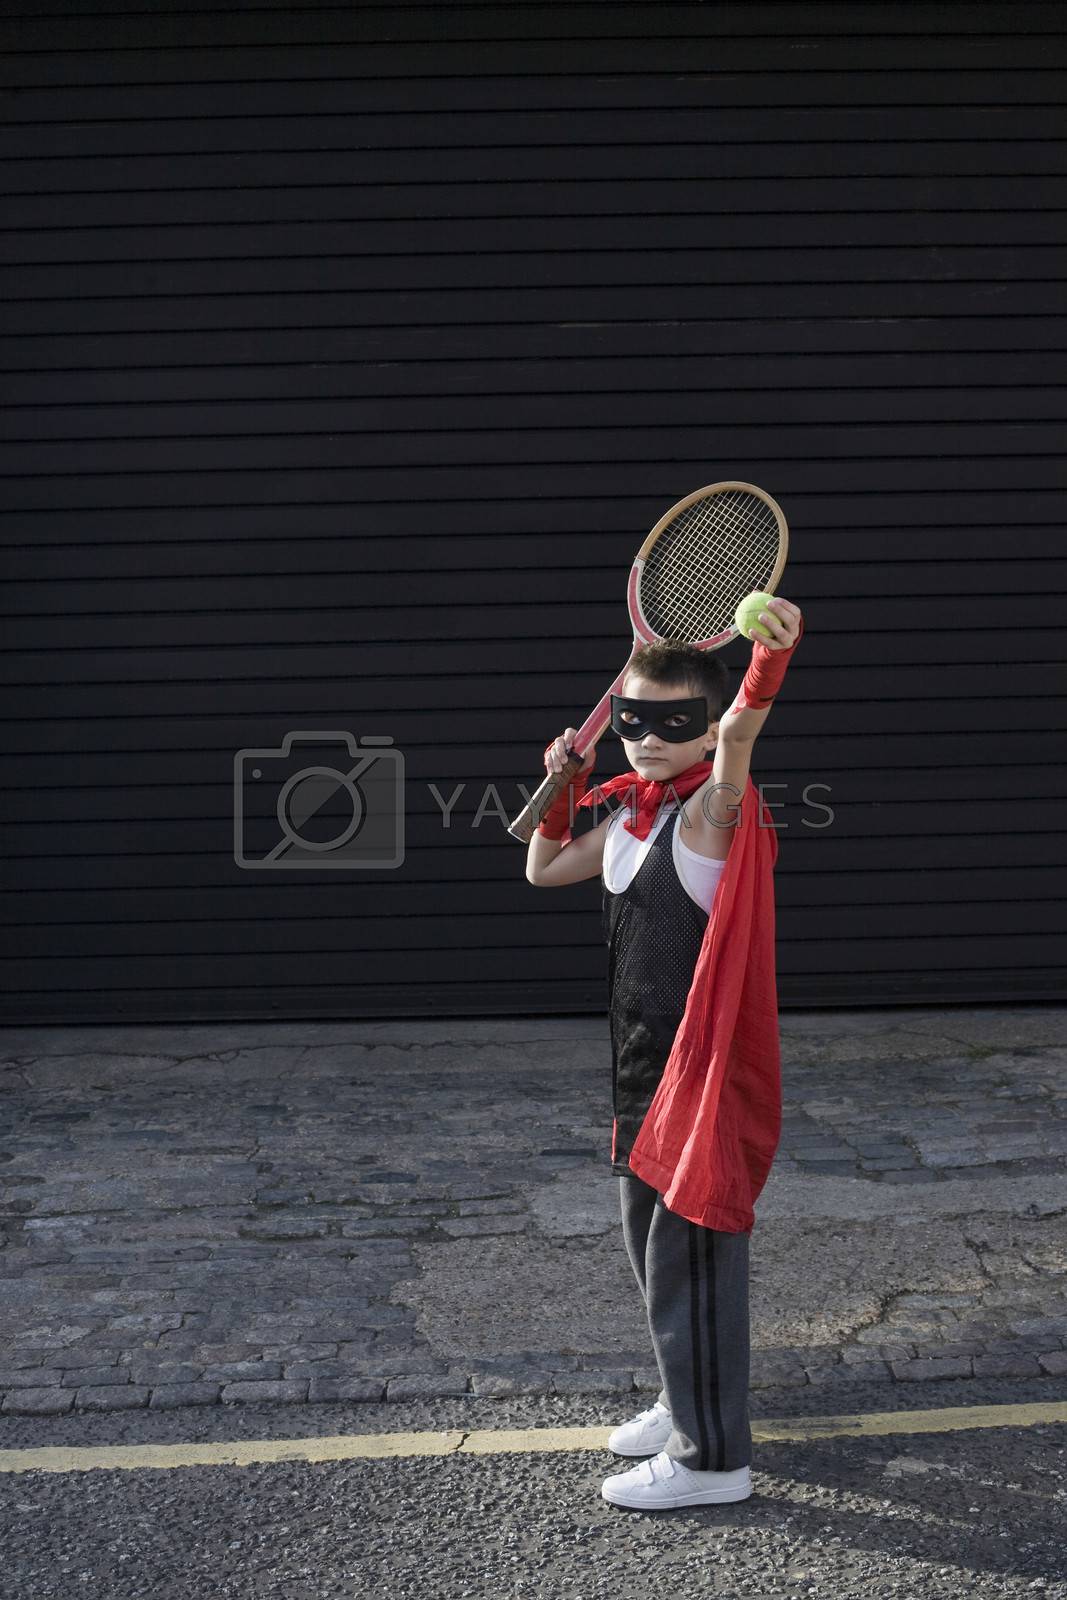 Royalty free image of Boy wearing Zorro costume with tennis racket by moodboard